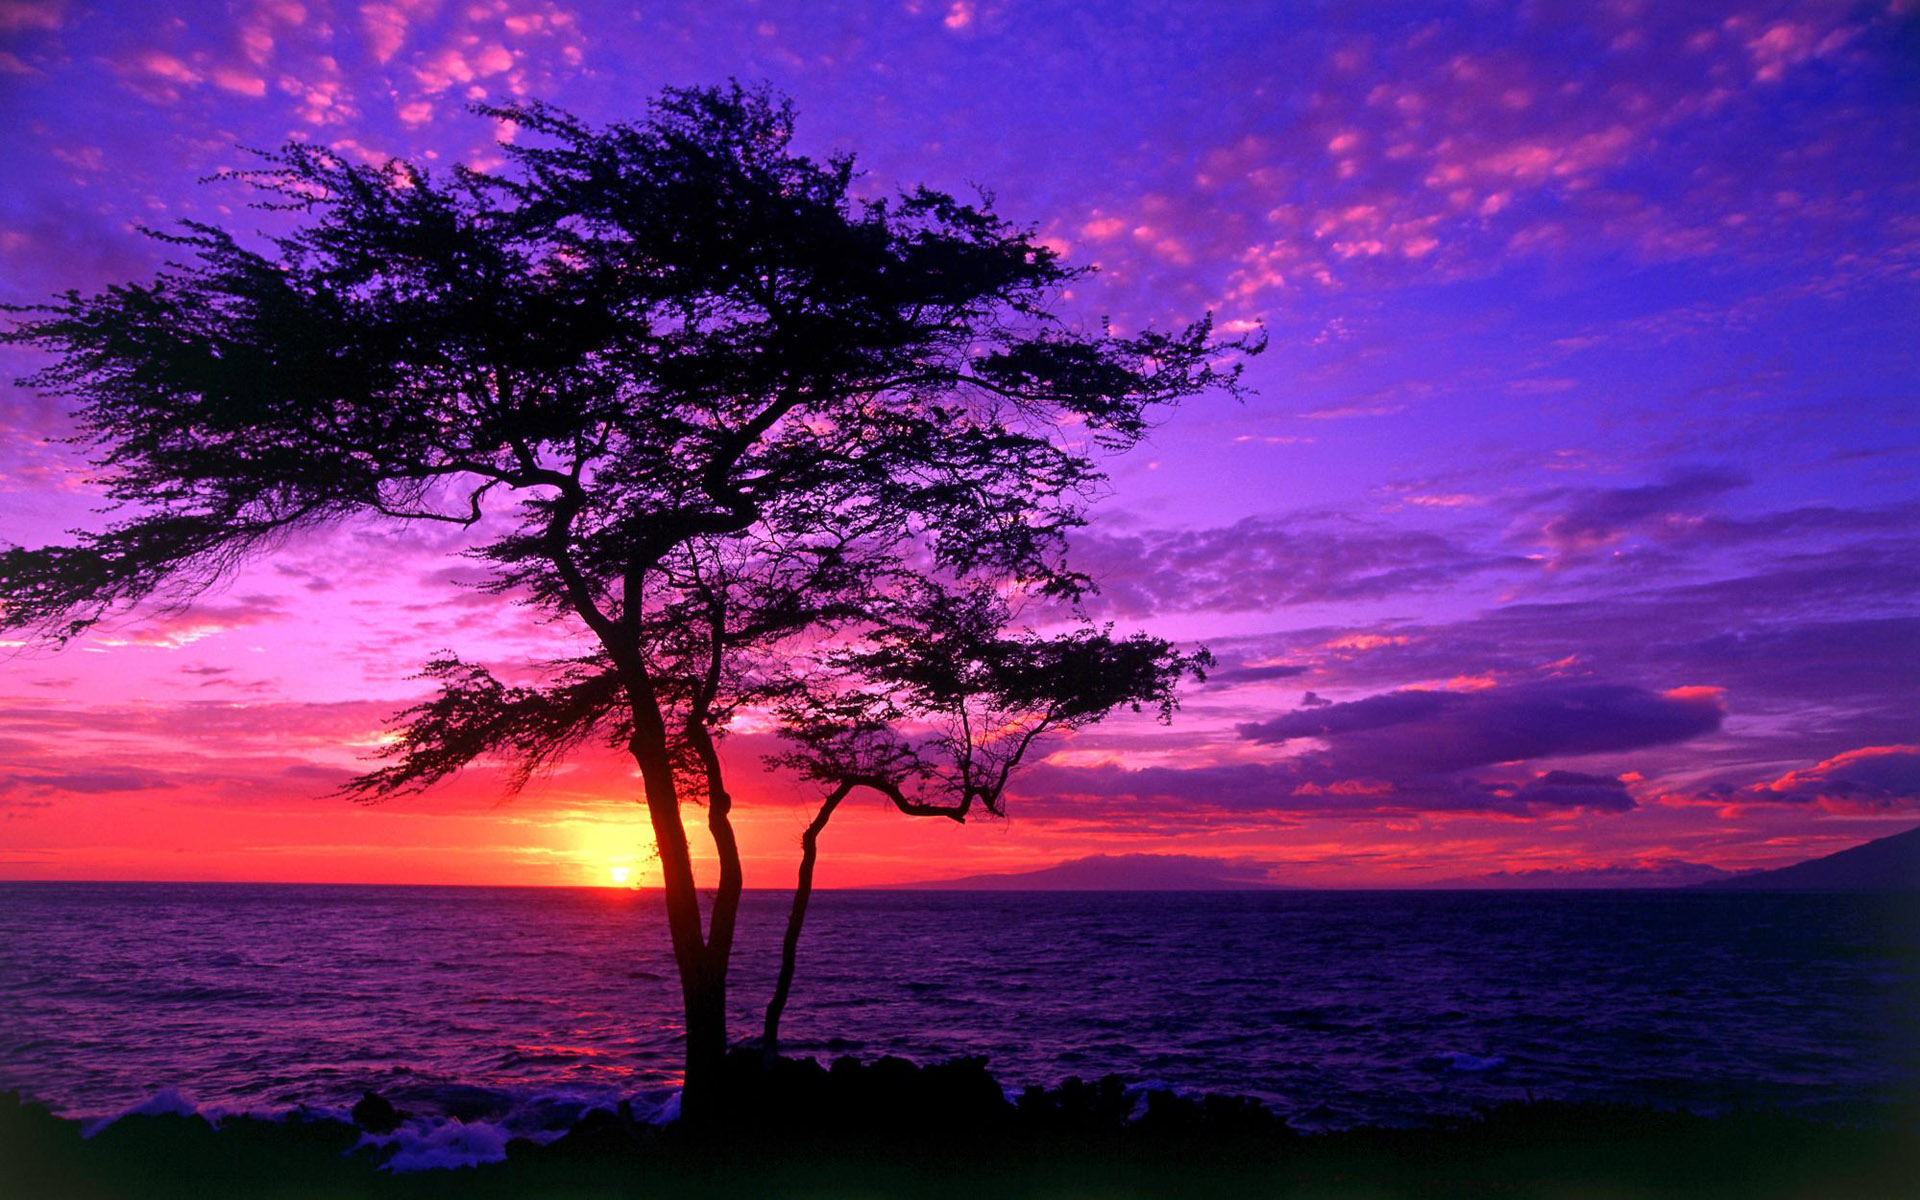 High Quality Purple Beach Sunset Wallpapers 6 - HD Wallpapers N